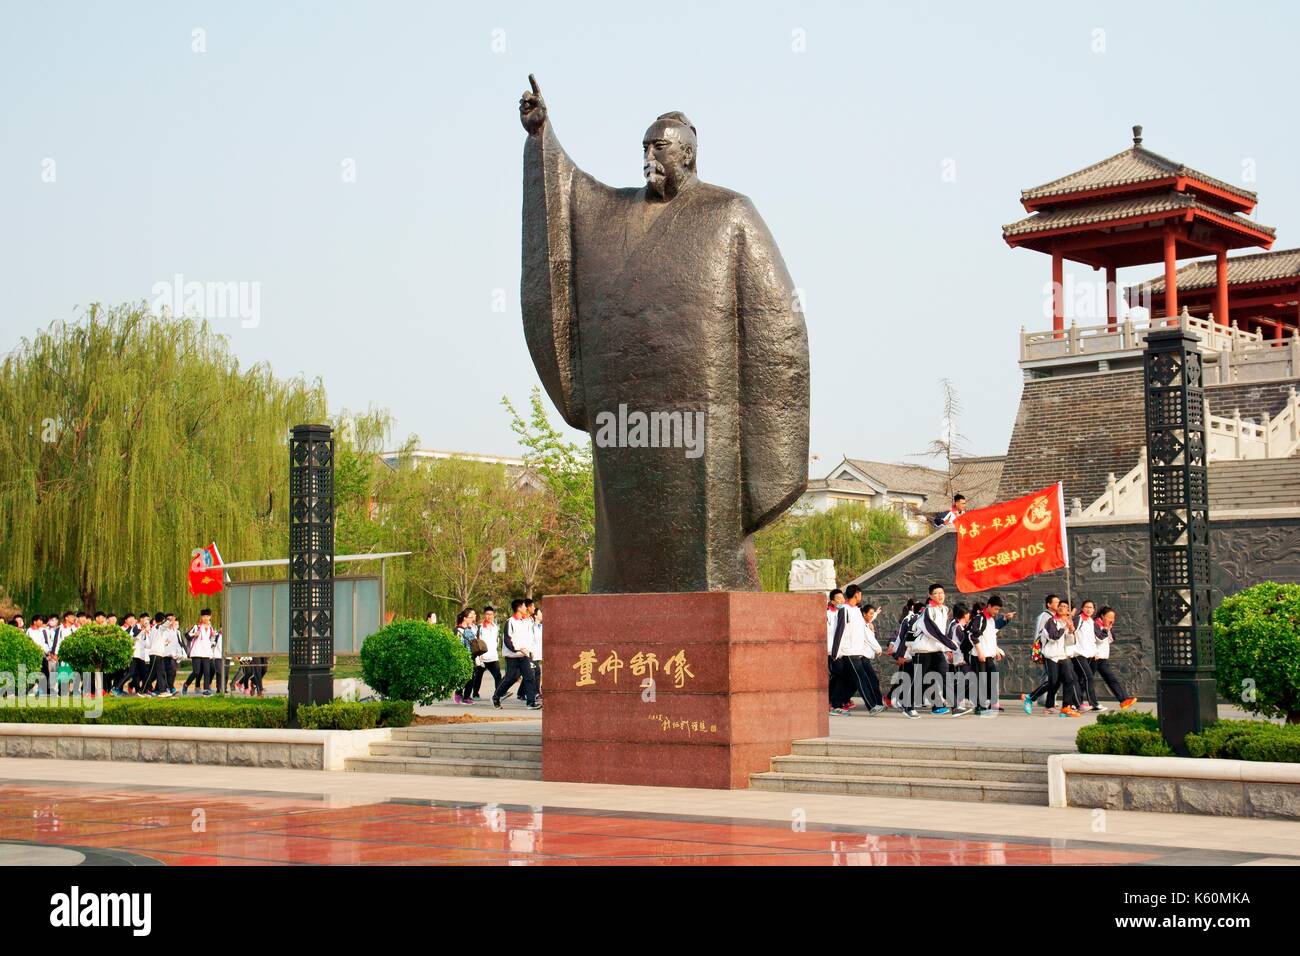 Dongzi Culture Park, City of Dezhou, China. College students parade past statue of Confucian philosopher Dong Zhongshu Stock Photo